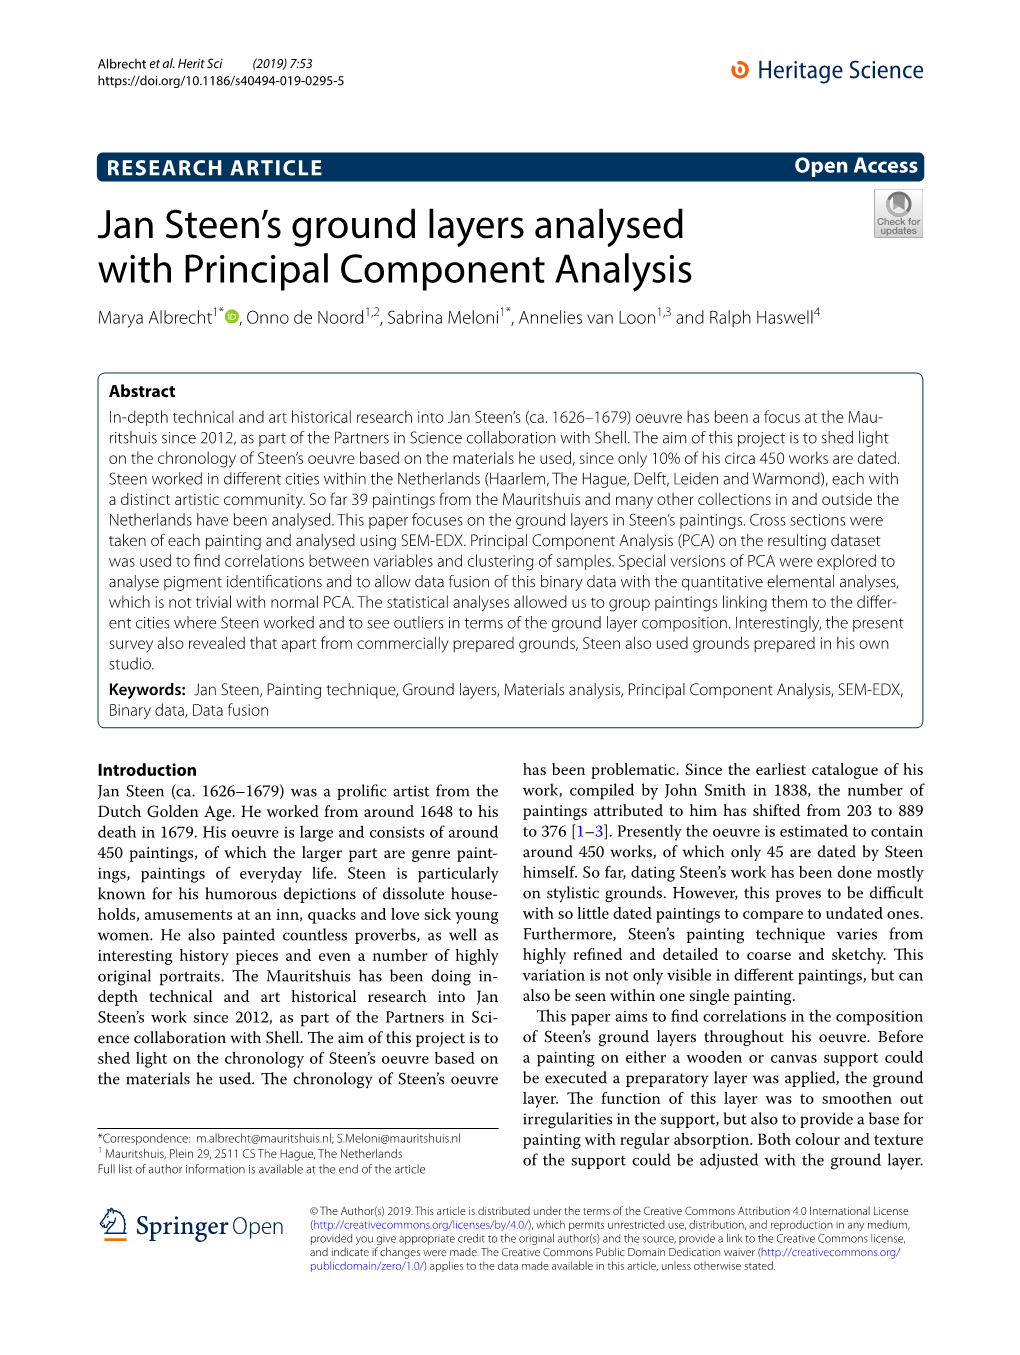 Jan Steen's Ground Layers Analysed with Principal Component Analysis